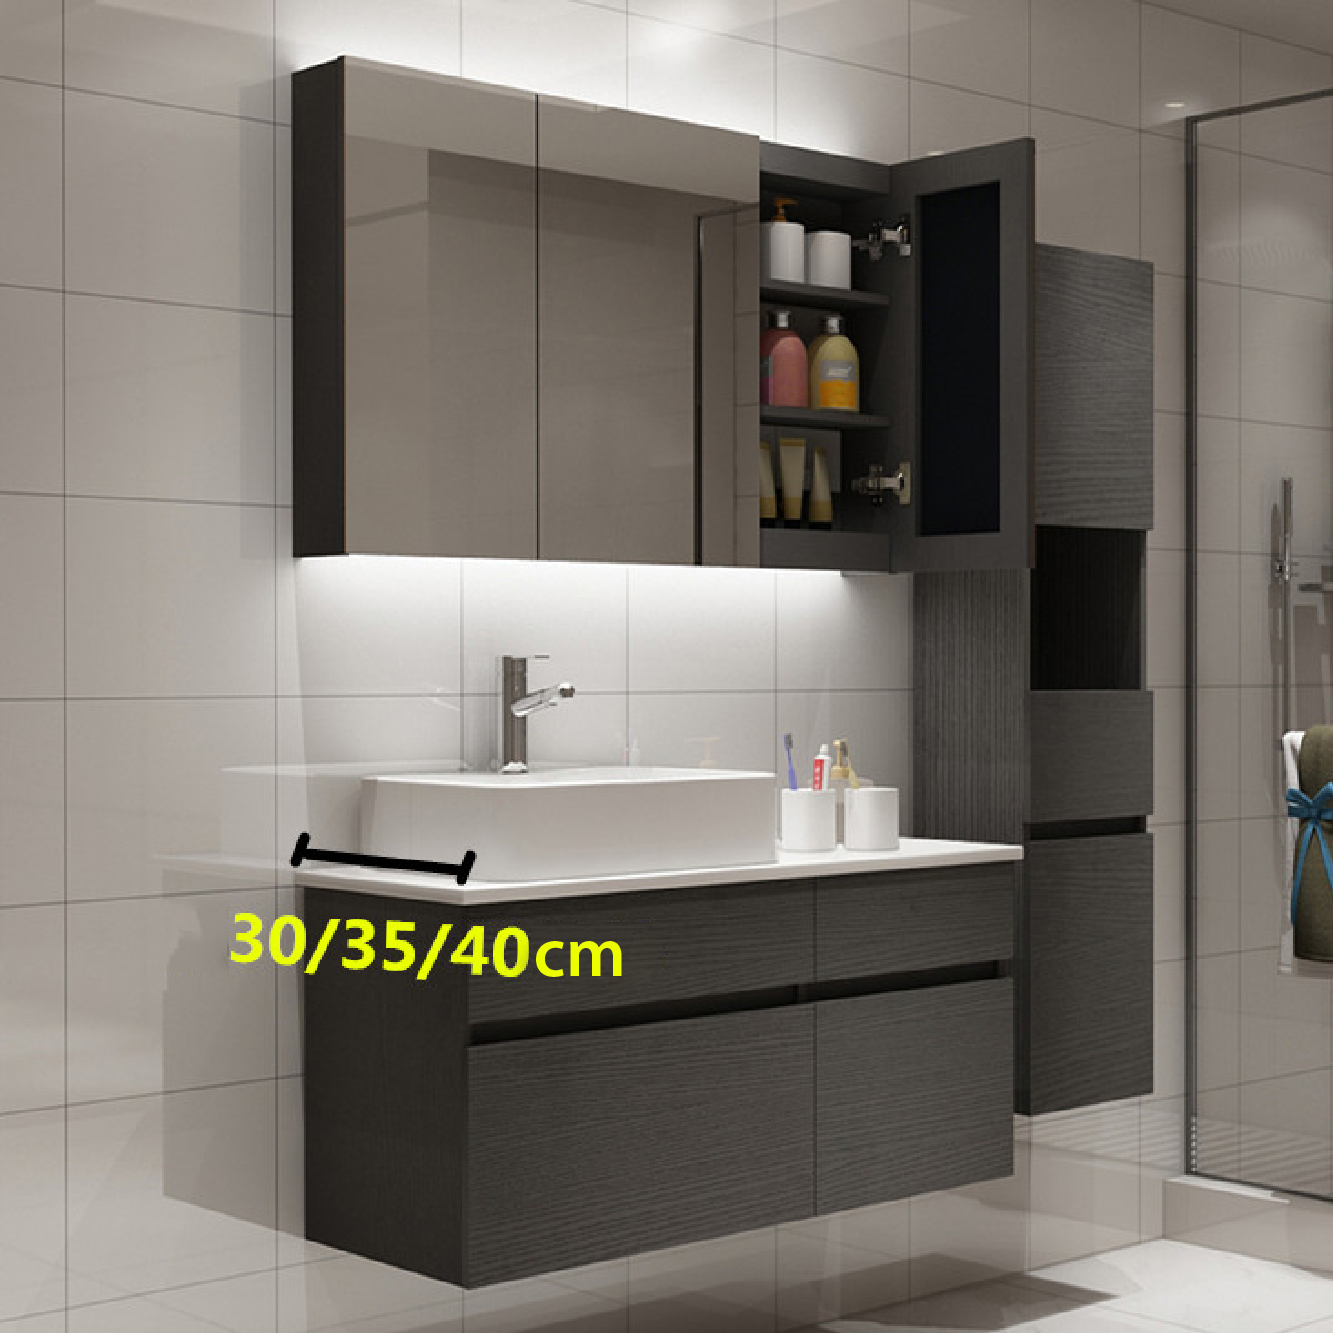 Bruno Full Customize Vanity Cabinet, Stainless Steel Mirror Cabinet Singapore